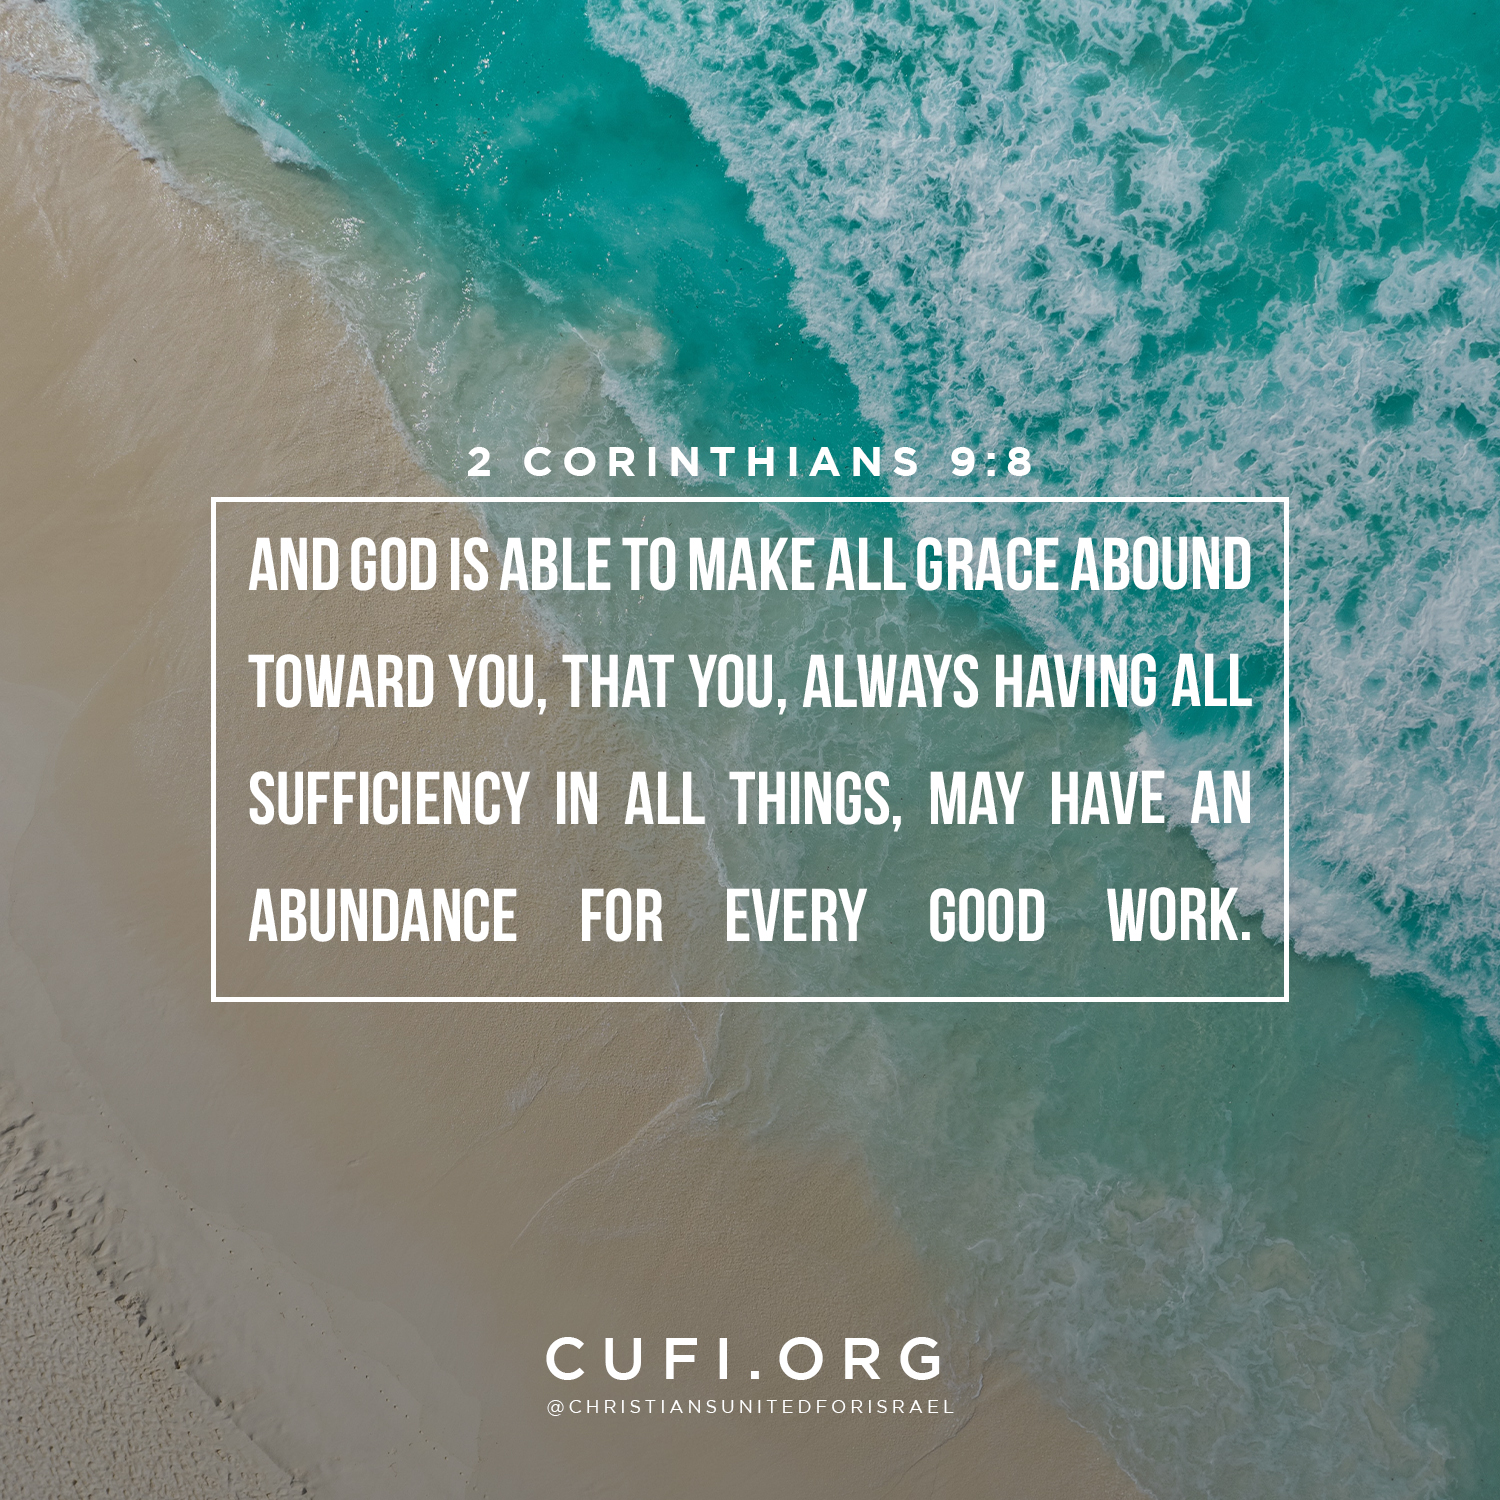 '2 CORINTHIANS 9:8 AND GOD IS ABLE TO MAKE ALL GRACE ABOUND TOWARD YOU, THAT YOU, ALWAYS HAVING ALL SUFFICIENCY IN ALL THINGS, MAY HAVE AN ABUNDANCE FOR EVERY GOOD WORK. CUFI.ORG @CHRISTIANSUNITEDFORISRAEL'